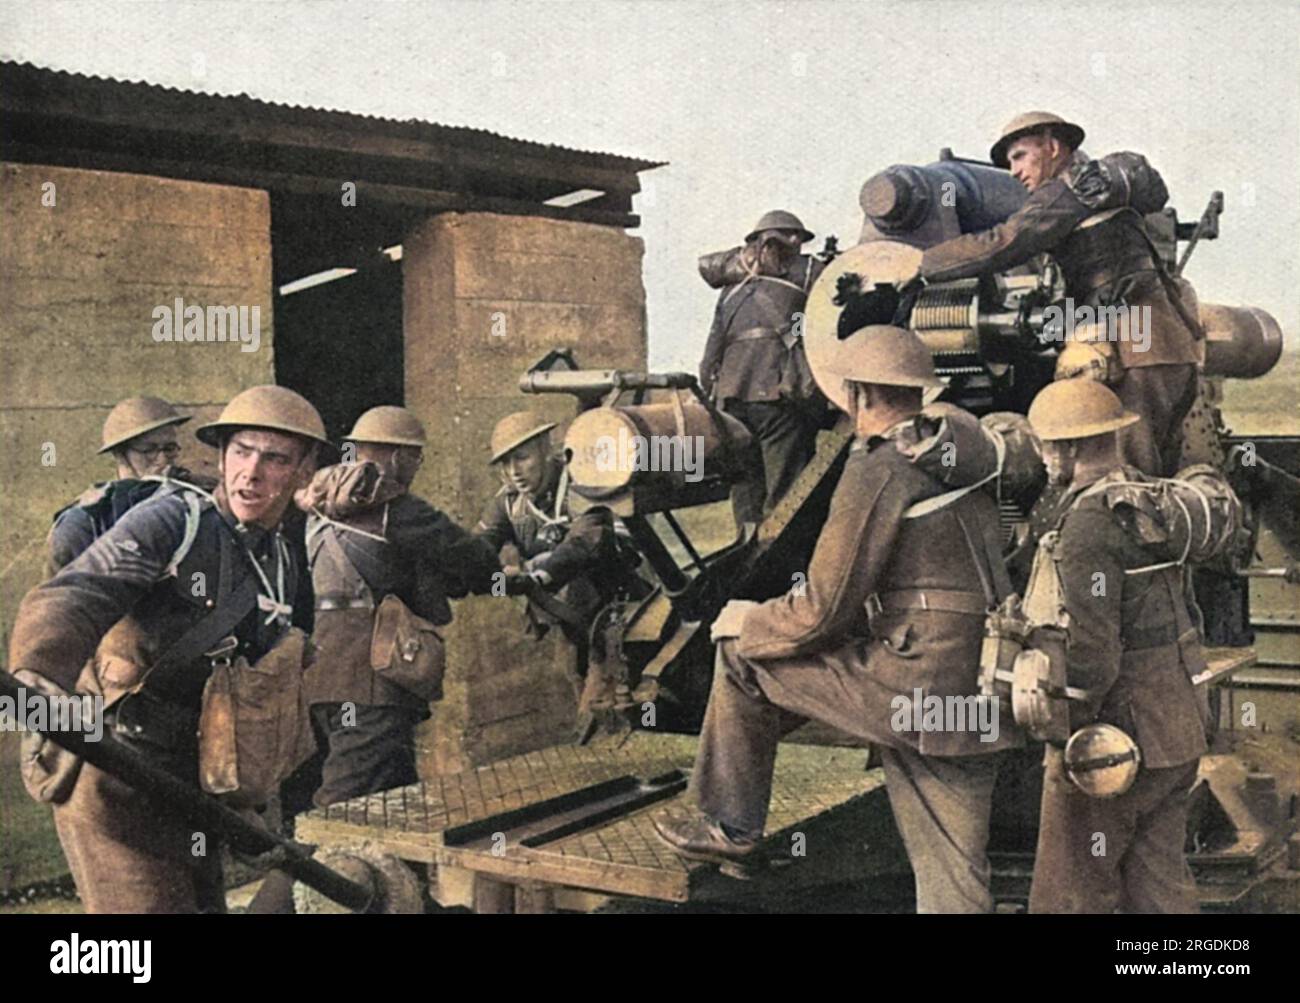 Scene at 'a famous Army school of Artillery' in Britain showing some of the latest and heaviest guns in action with men being trained to use them.  A large crew can be seen operating a 9.2 howitzer gun, with each man to his allotted post. Stock Photo